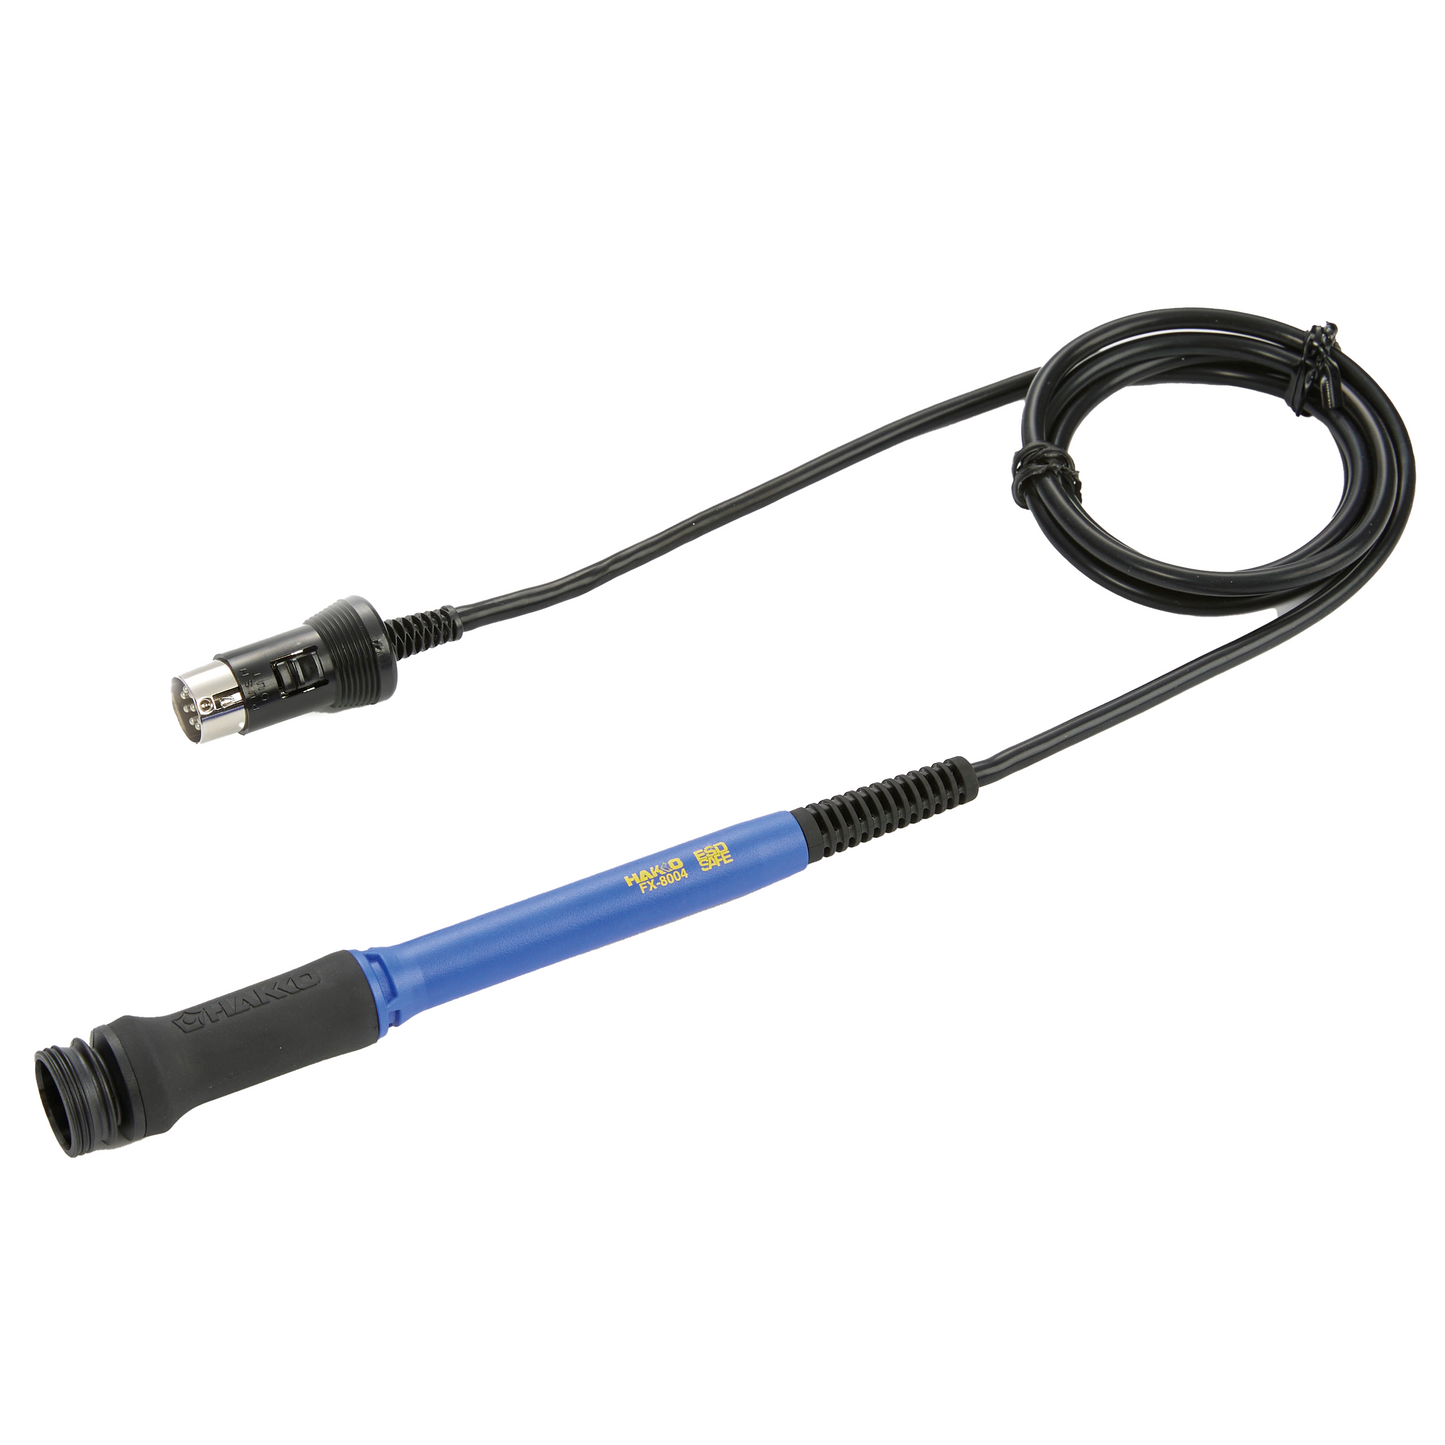 Hakko soldering iron FX8004 compatible with FX-805 Soldering Station 400W heavy duty high power PCB board SMT assembly Hakko Products